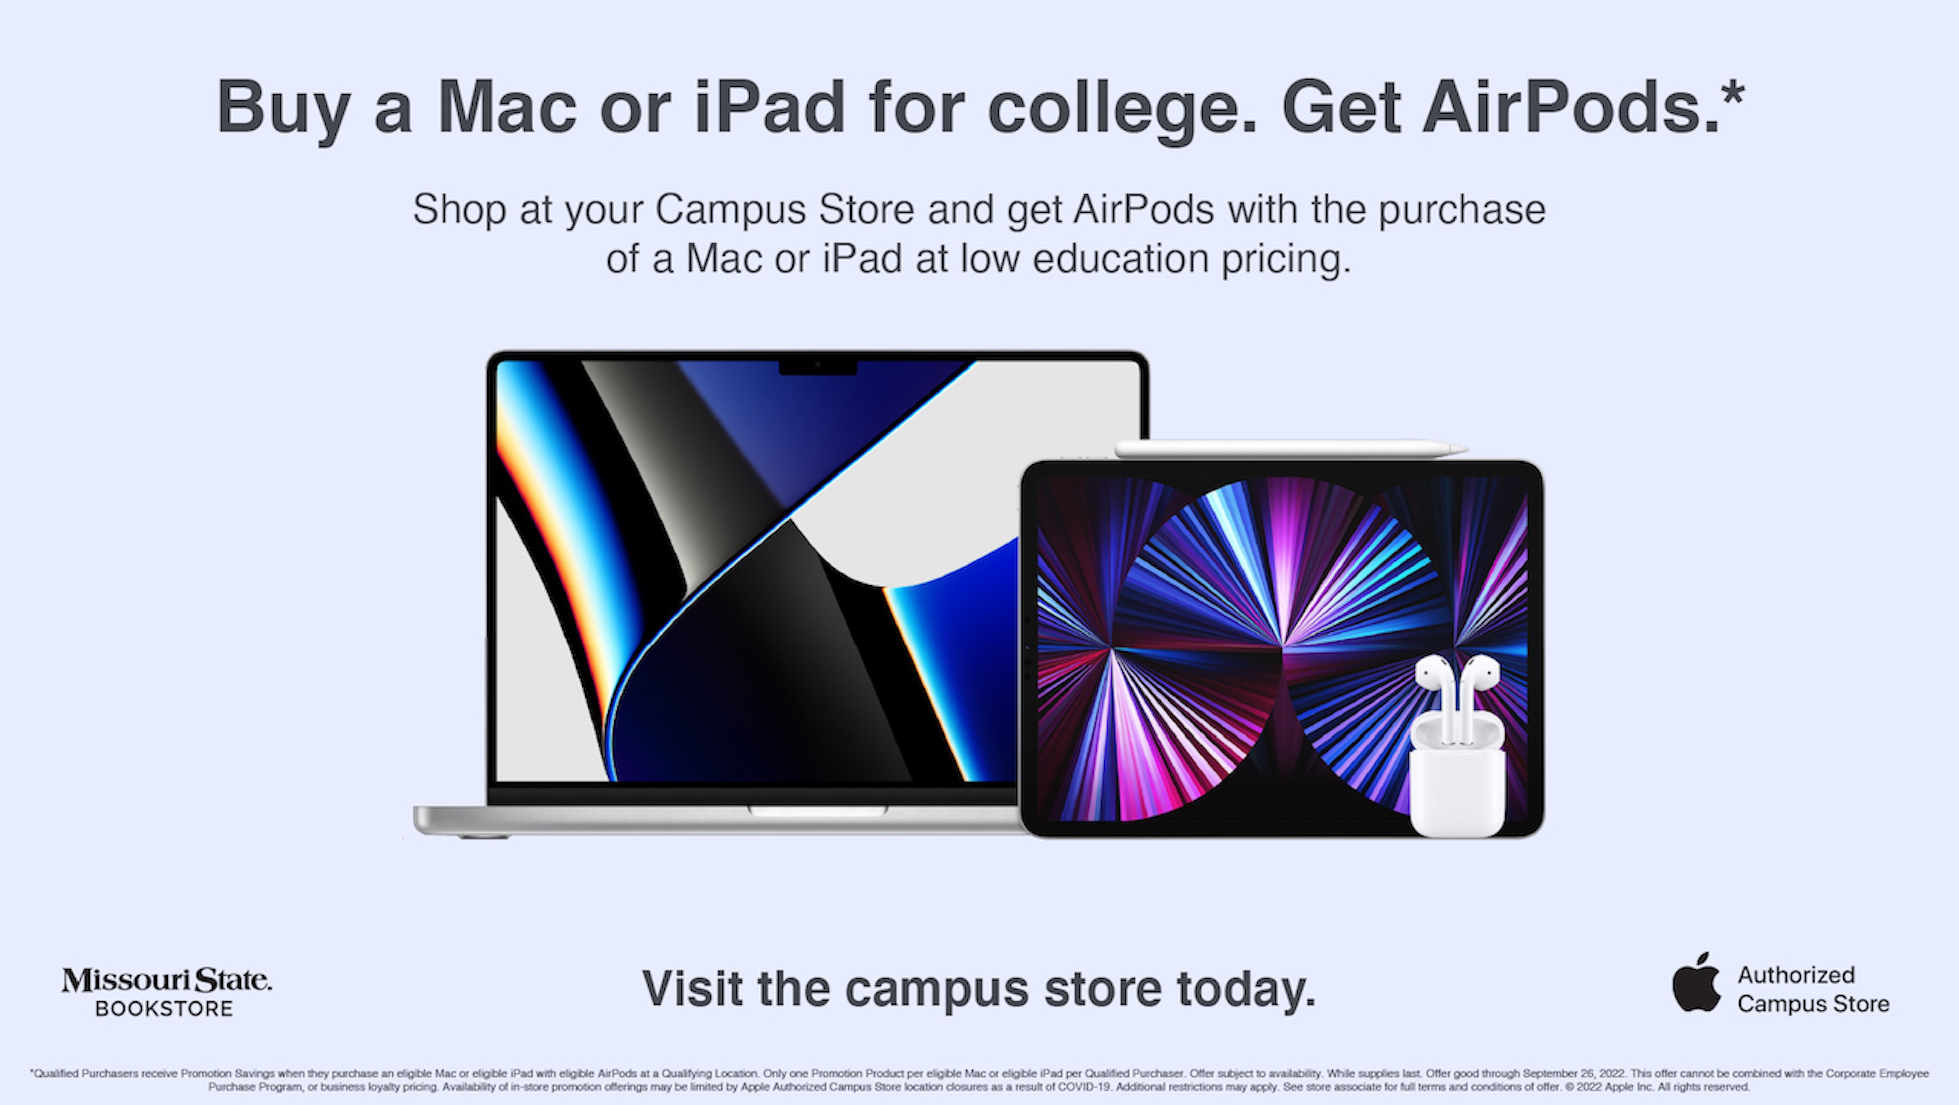 buy a Mac or ipad for college. get AirPods. shop at the Missouri State Bookstore and get AirPods with the purchase of a Mac or iPad at low education pricing. shop now